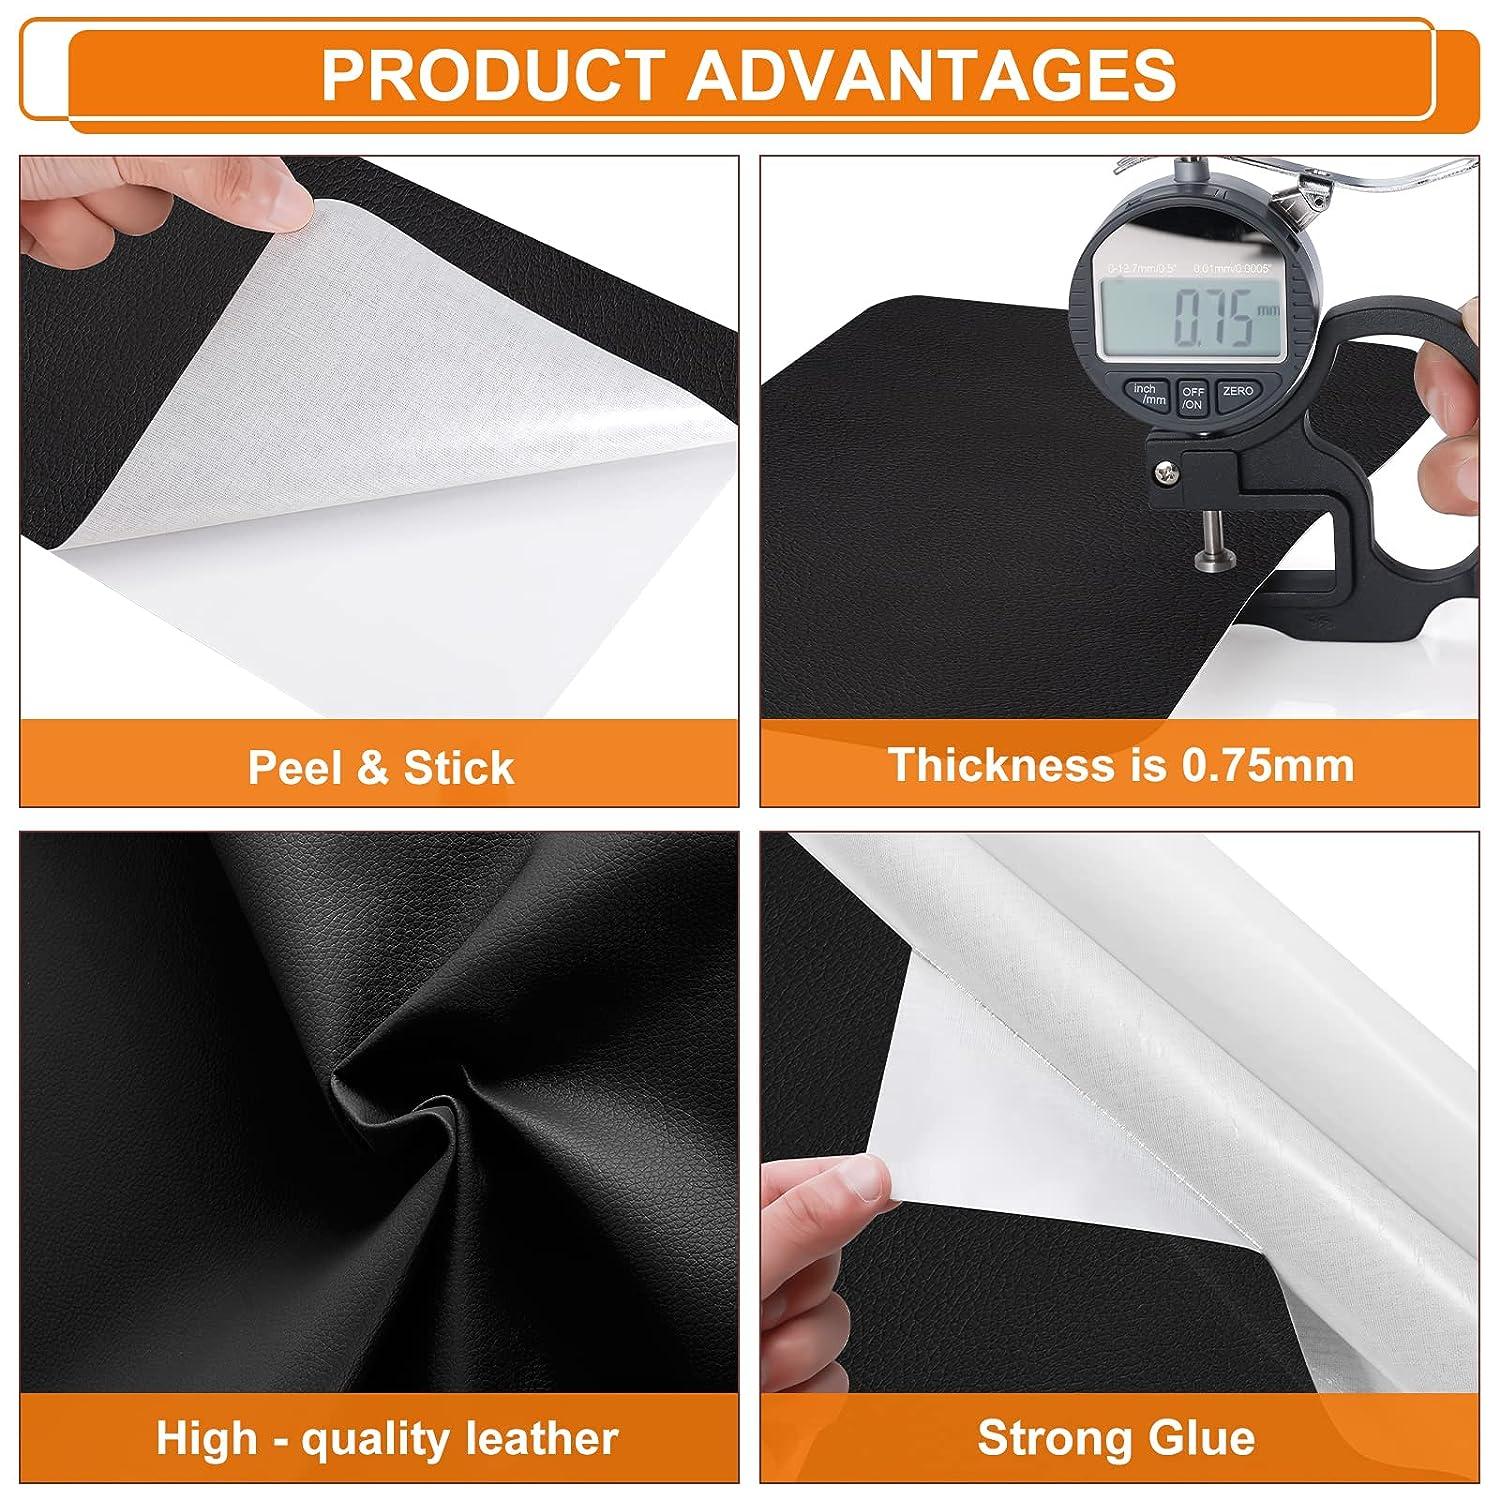 Leather Repair Tape Patch - 4 x 63 inch Leather Repair Patch Self Adhesive  Vinyl Repair Tape - Furniture Leather Repair Kit for Car Seats Couches  Jackets Sofas Handbags Black 4x63 inch Black